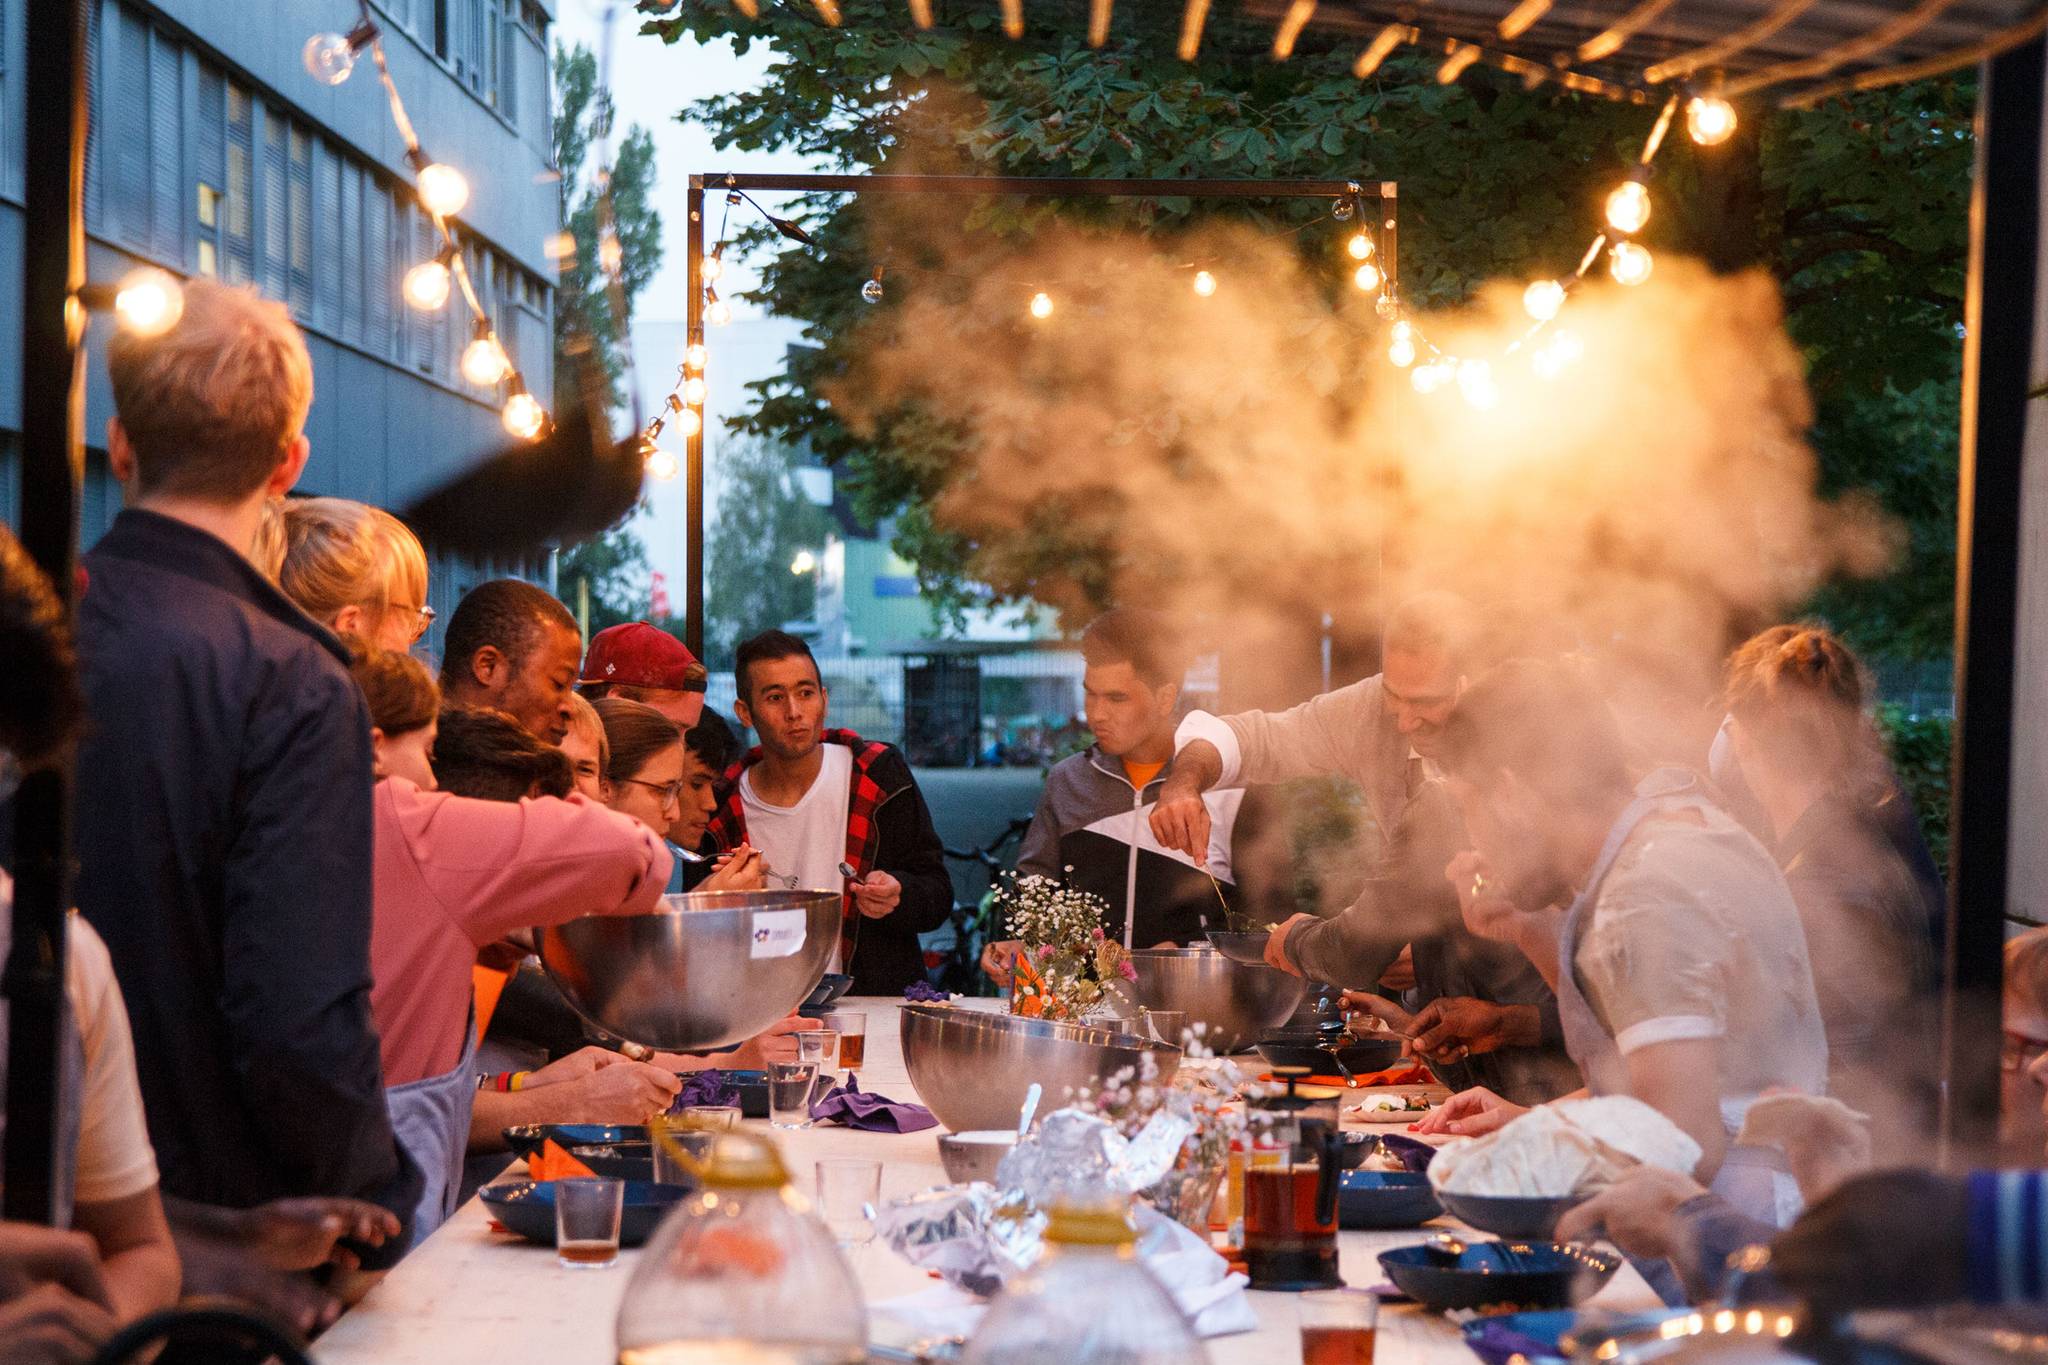 How do Berliners use local cuisine to help refugees?